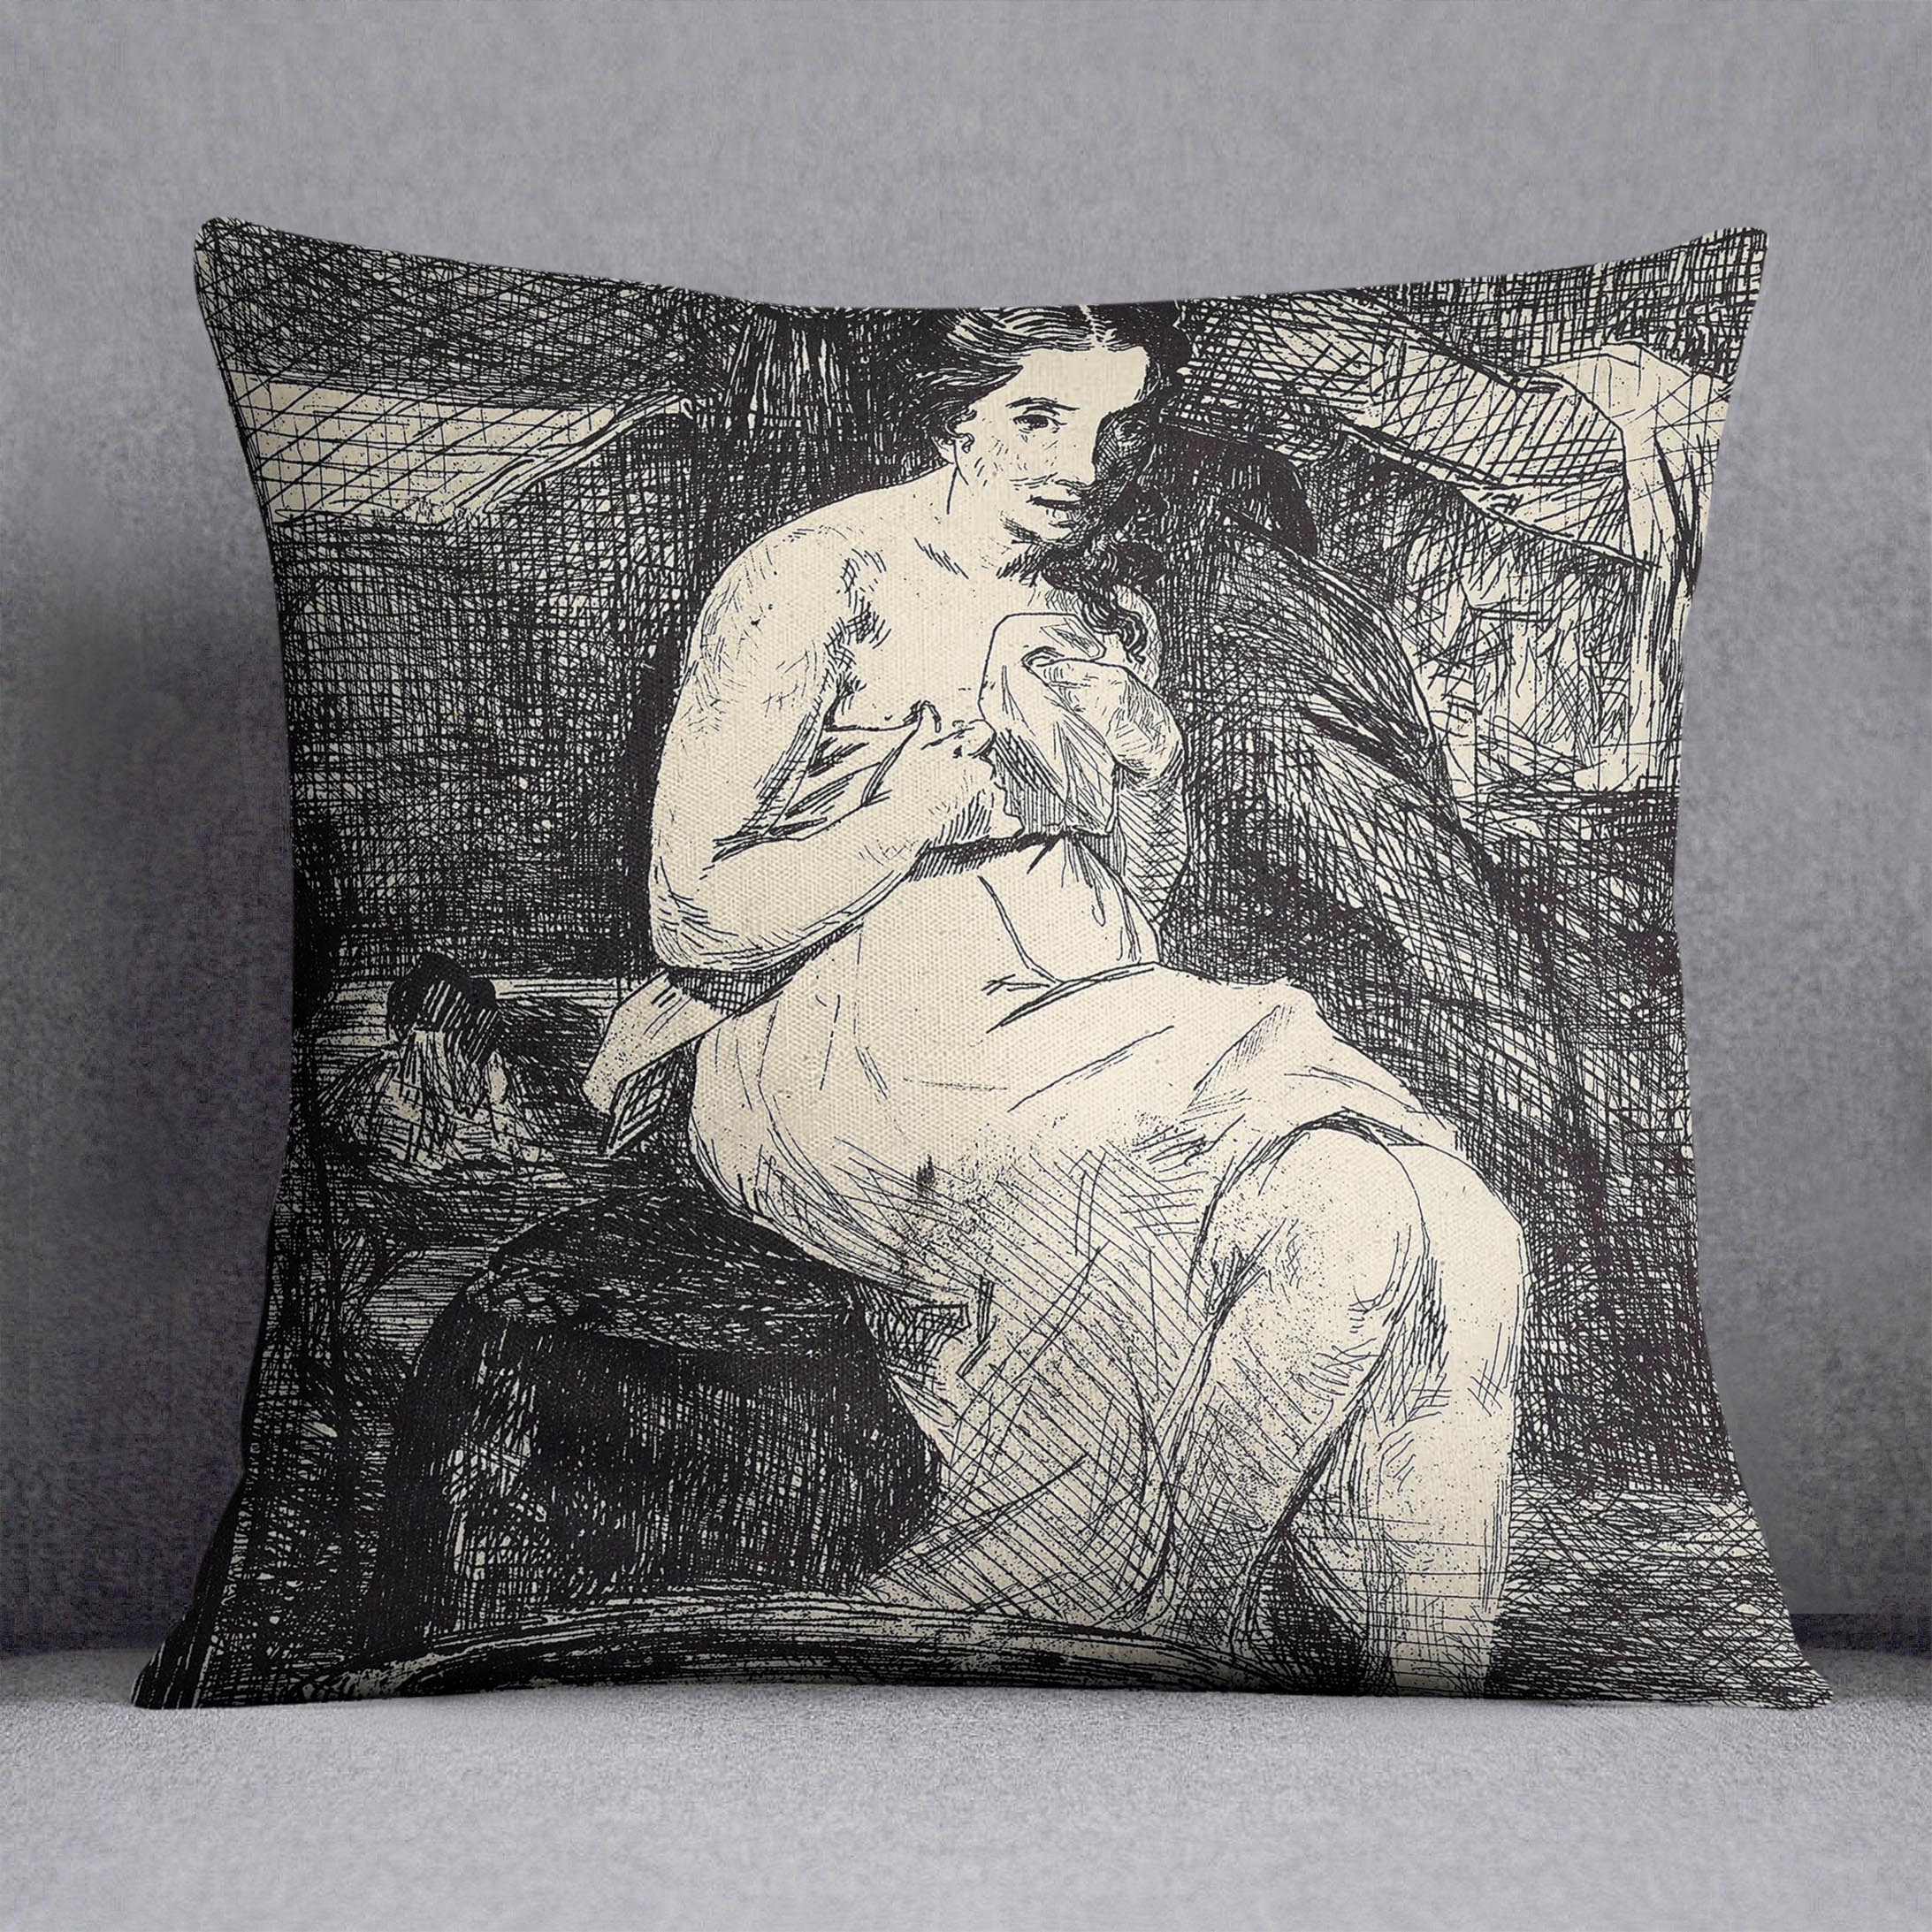 The Toillette by Manet Cushion